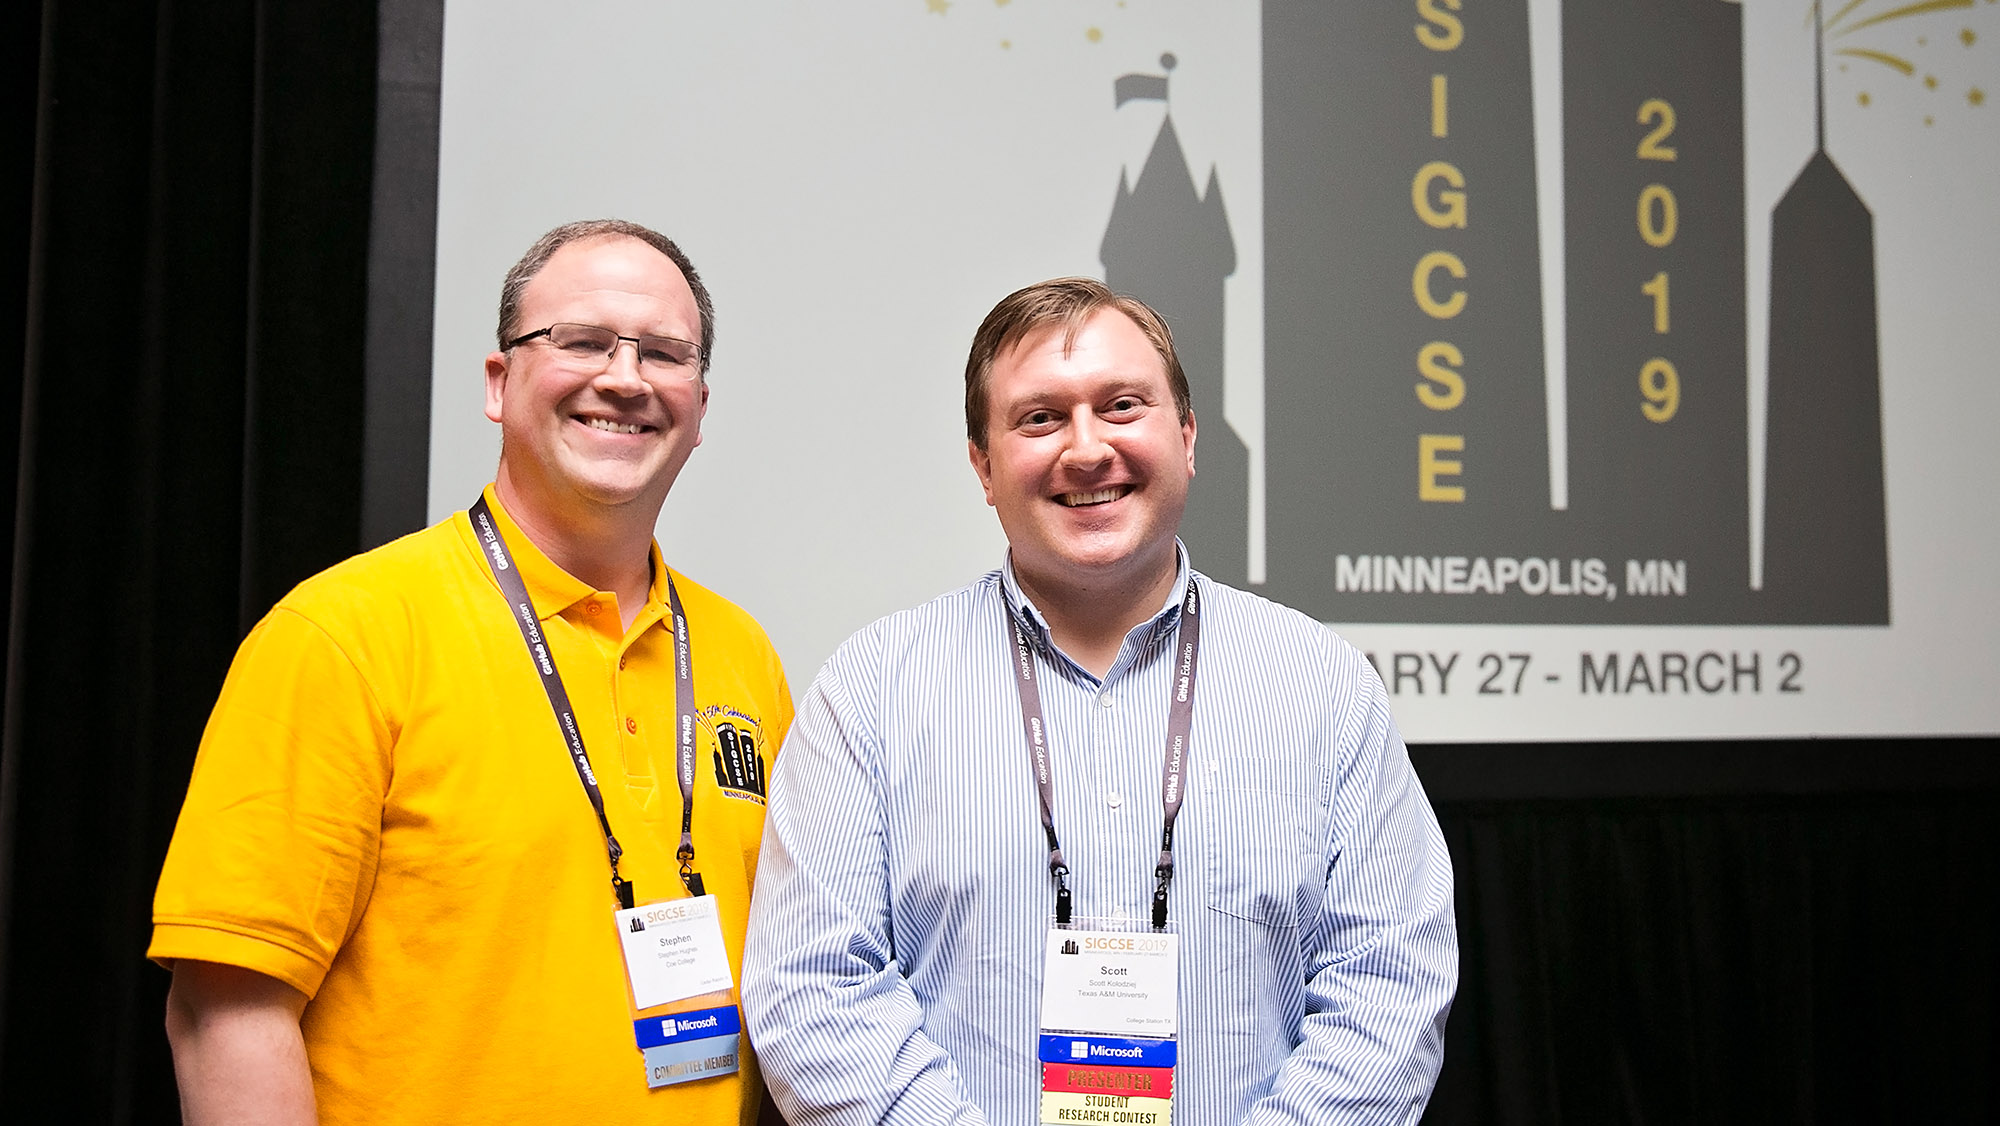 Dr. Stephen Hughes and Scott Kolodziej in front of a SIGCSE presentation screen